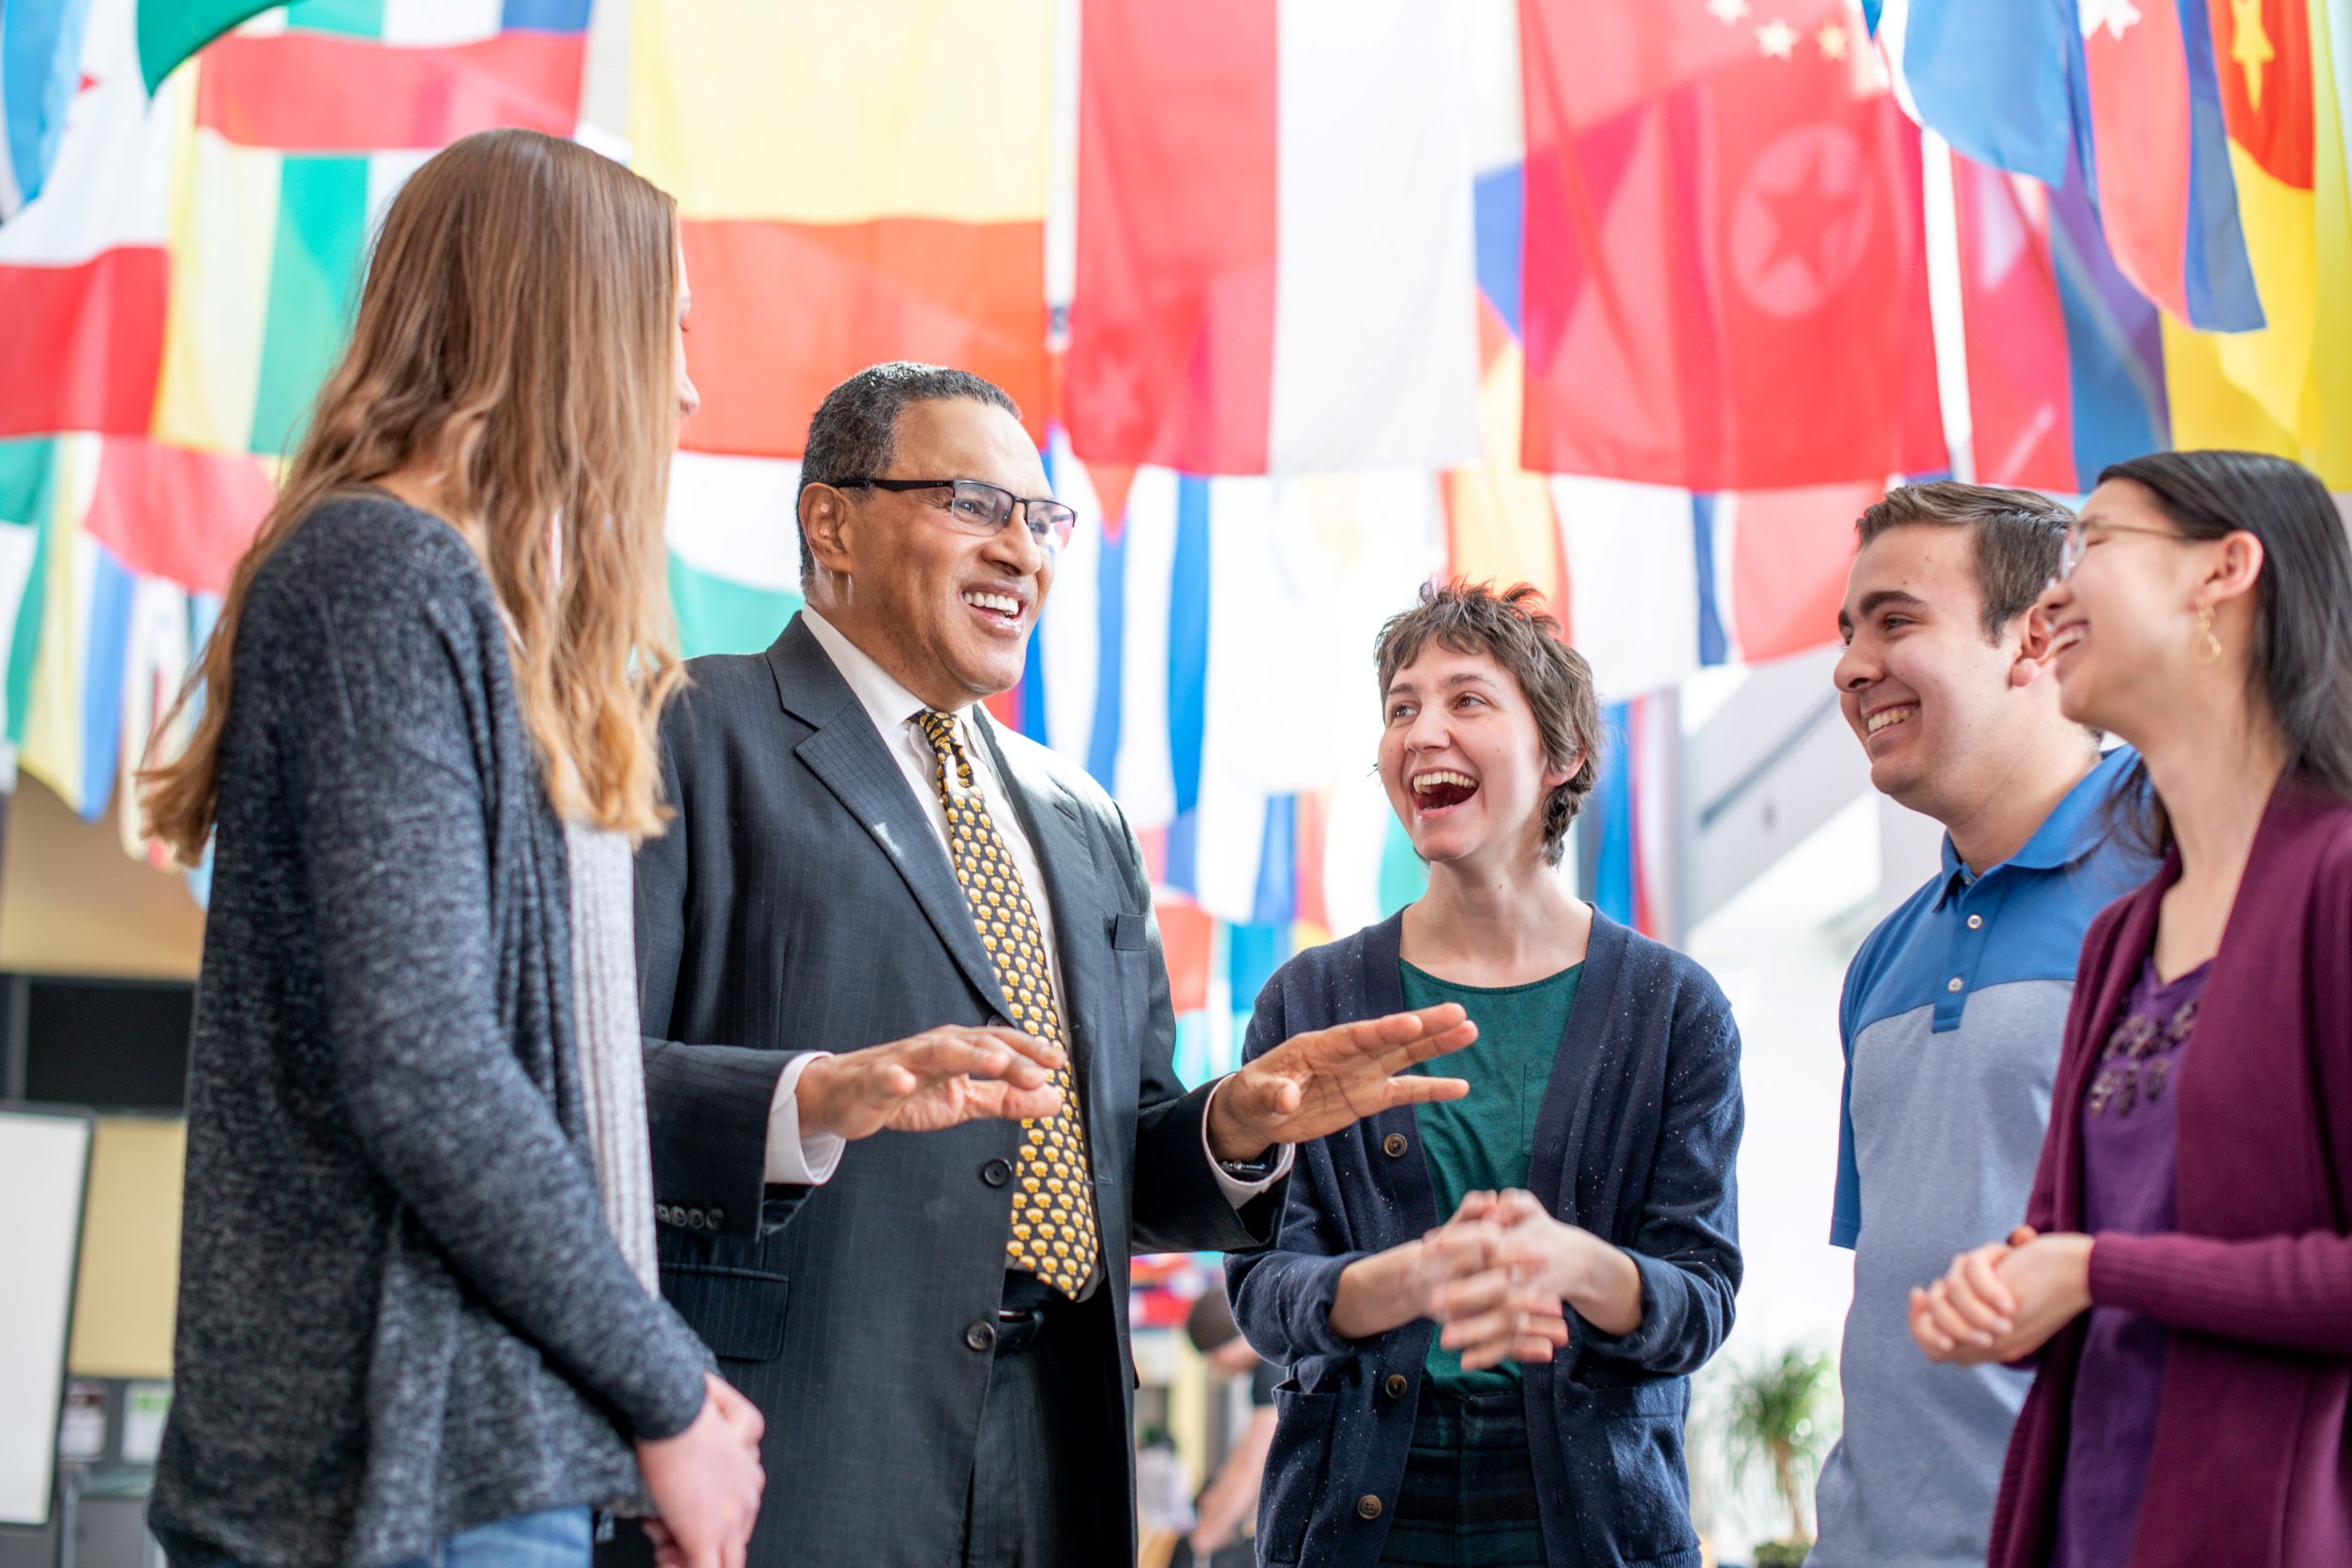 Older man in suit speaks with four smiling students, beneath international flags.